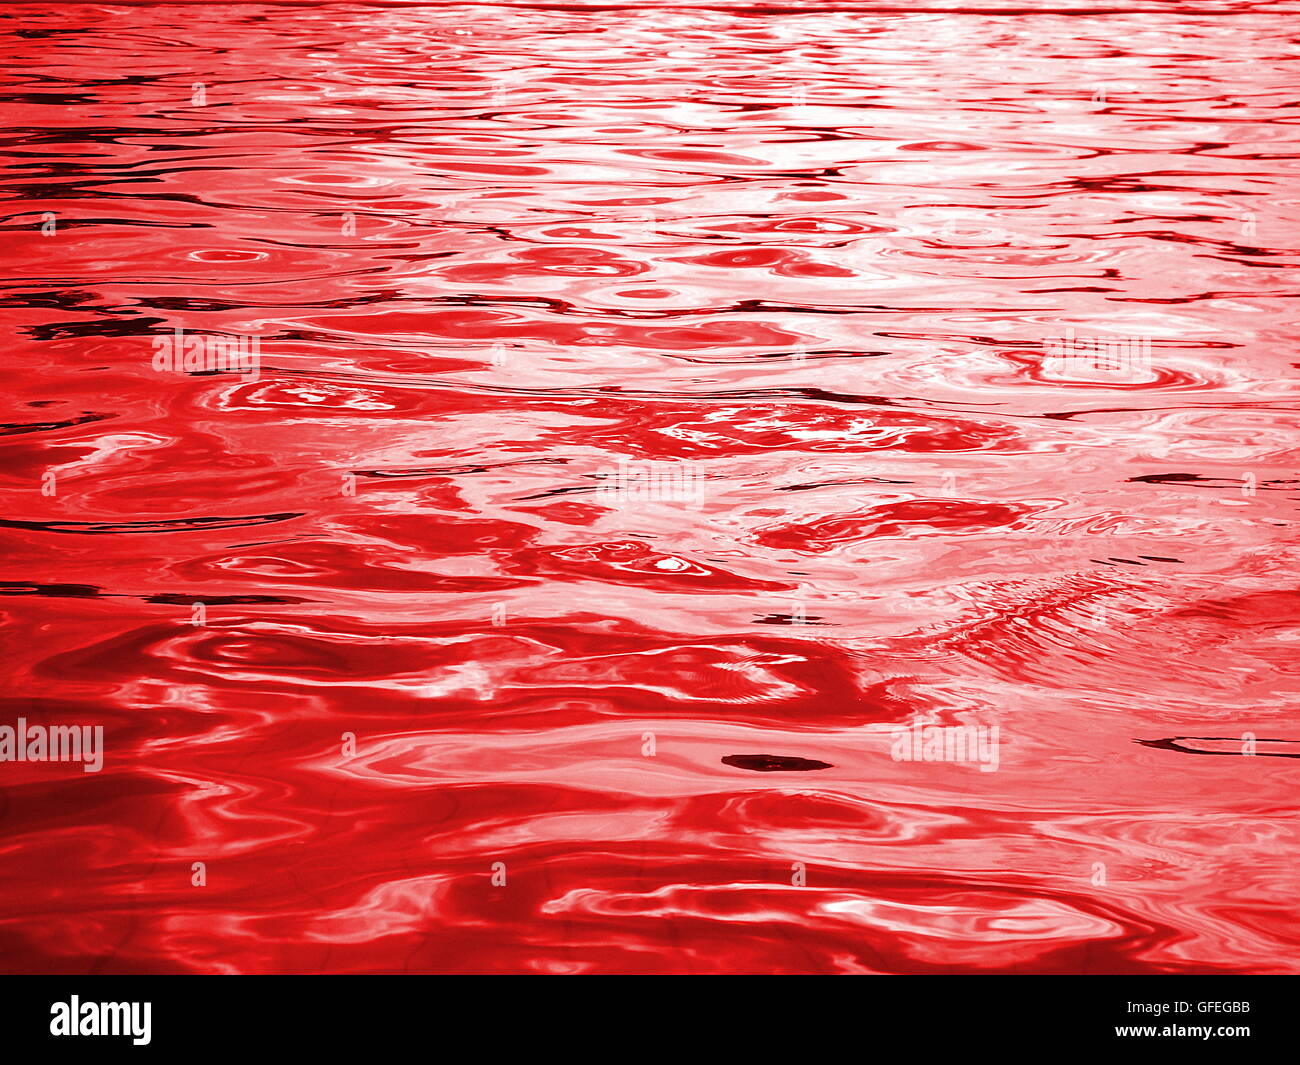 https://c8.alamy.com/comp/GFEGBB/reflection-of-light-on-the-waves-red-water-and-light-from-the-sun-GFEGBB.jpg